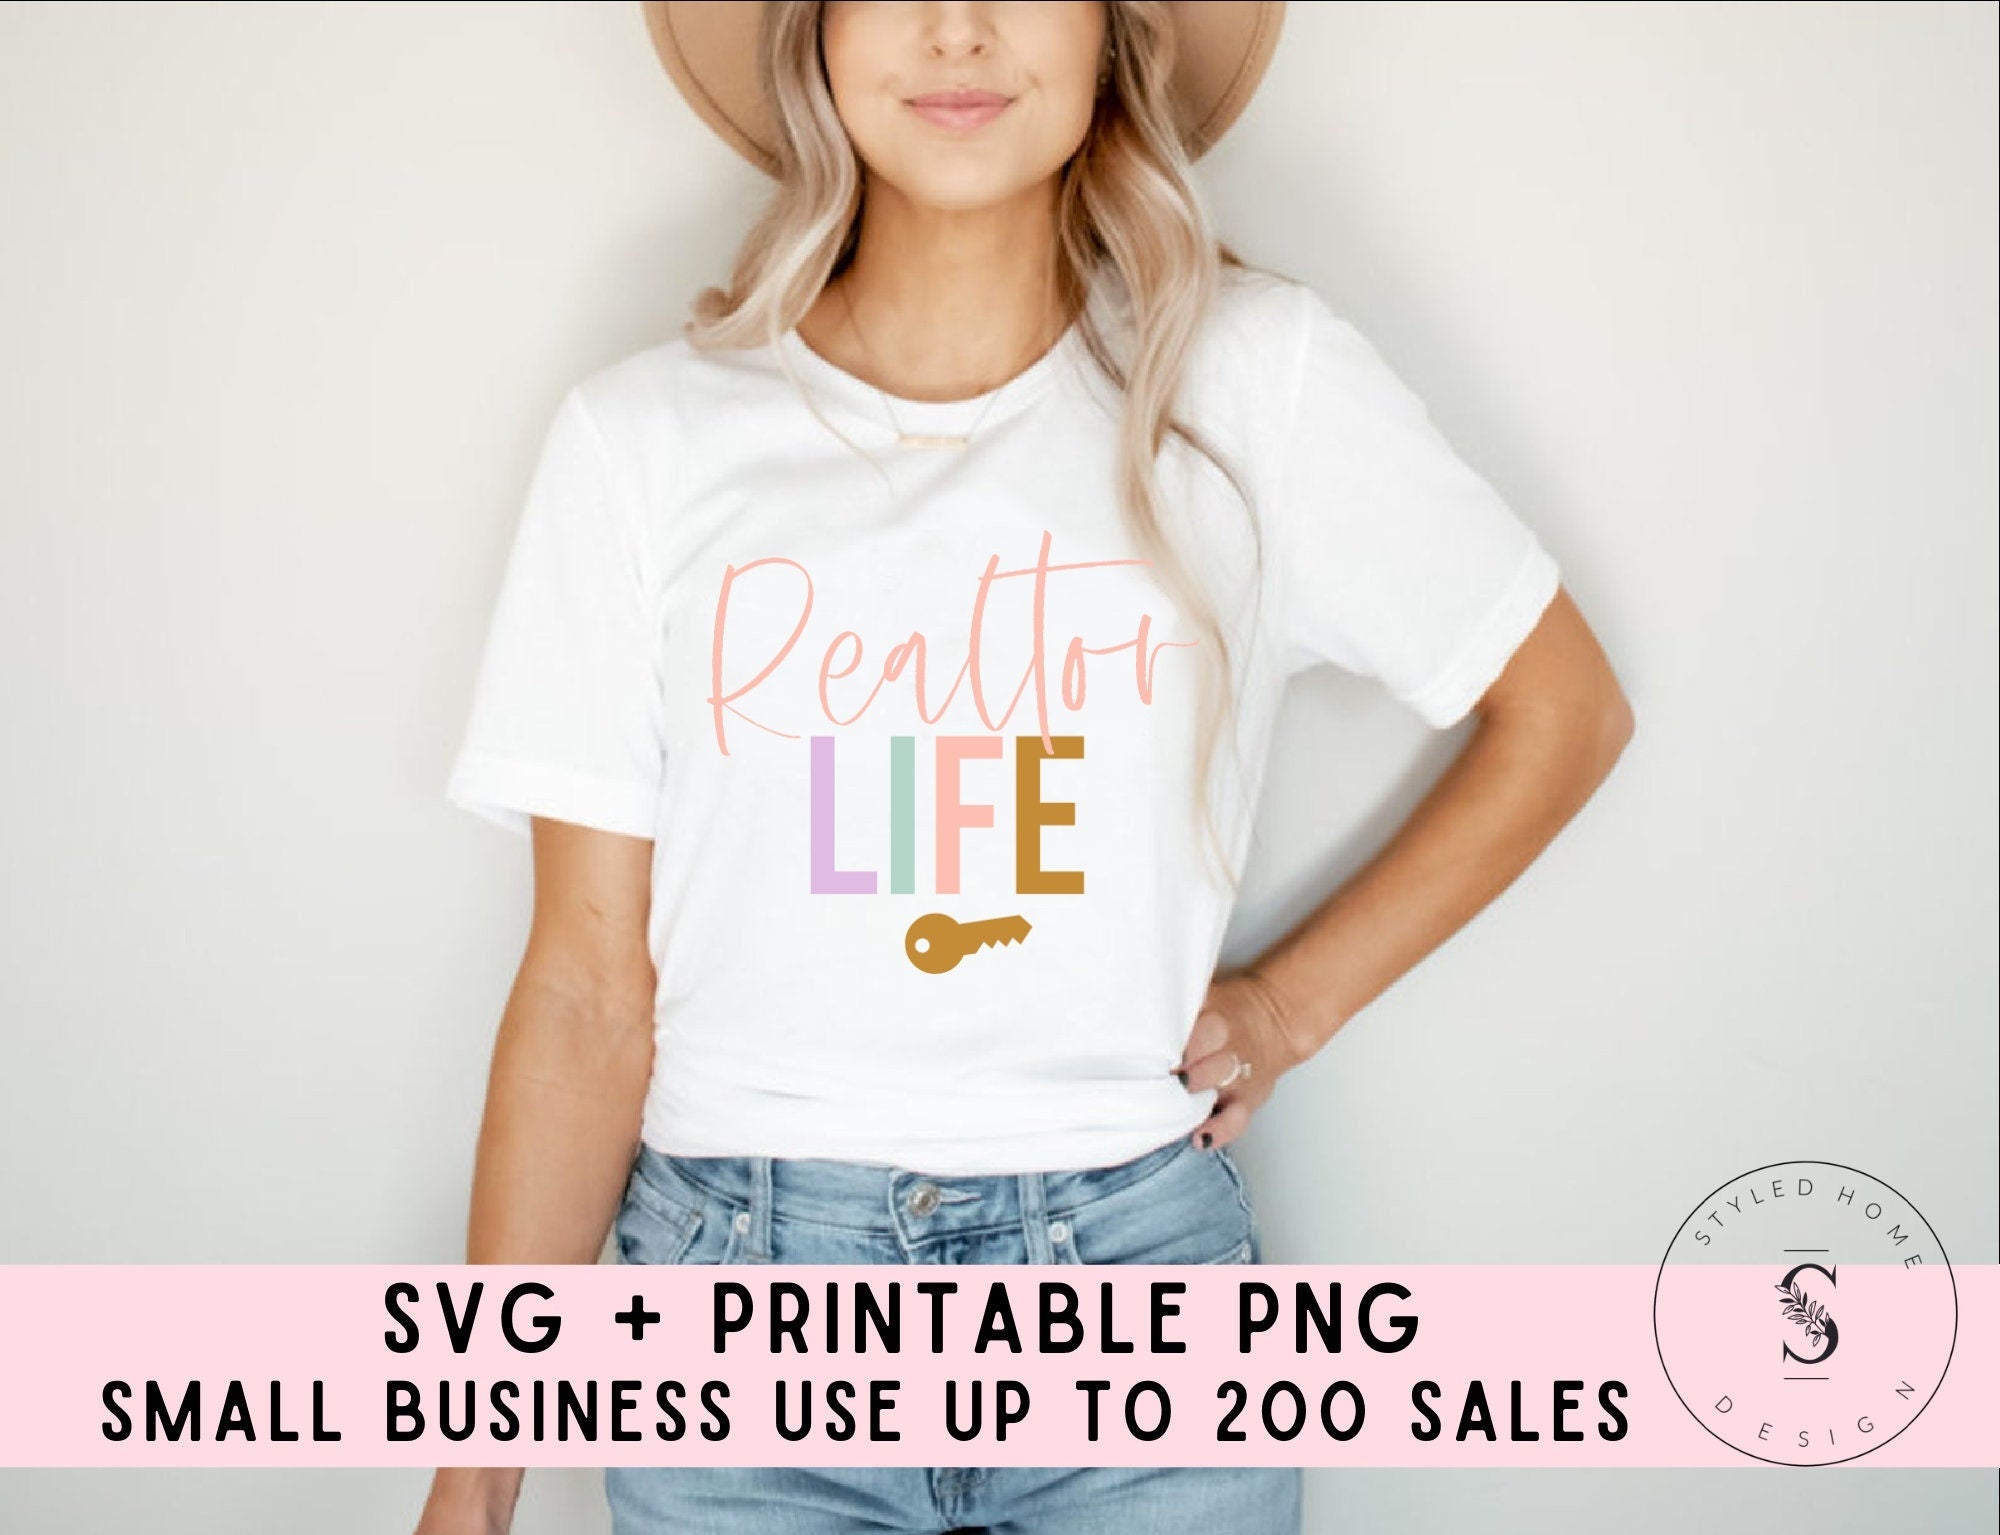 Realtor Life, Everything I Touch Turns to Sold, Realtor Svg, Realtor Shirt, T-Shirt Design, Graphic Tee, Printable PNG Cricut Sublimation